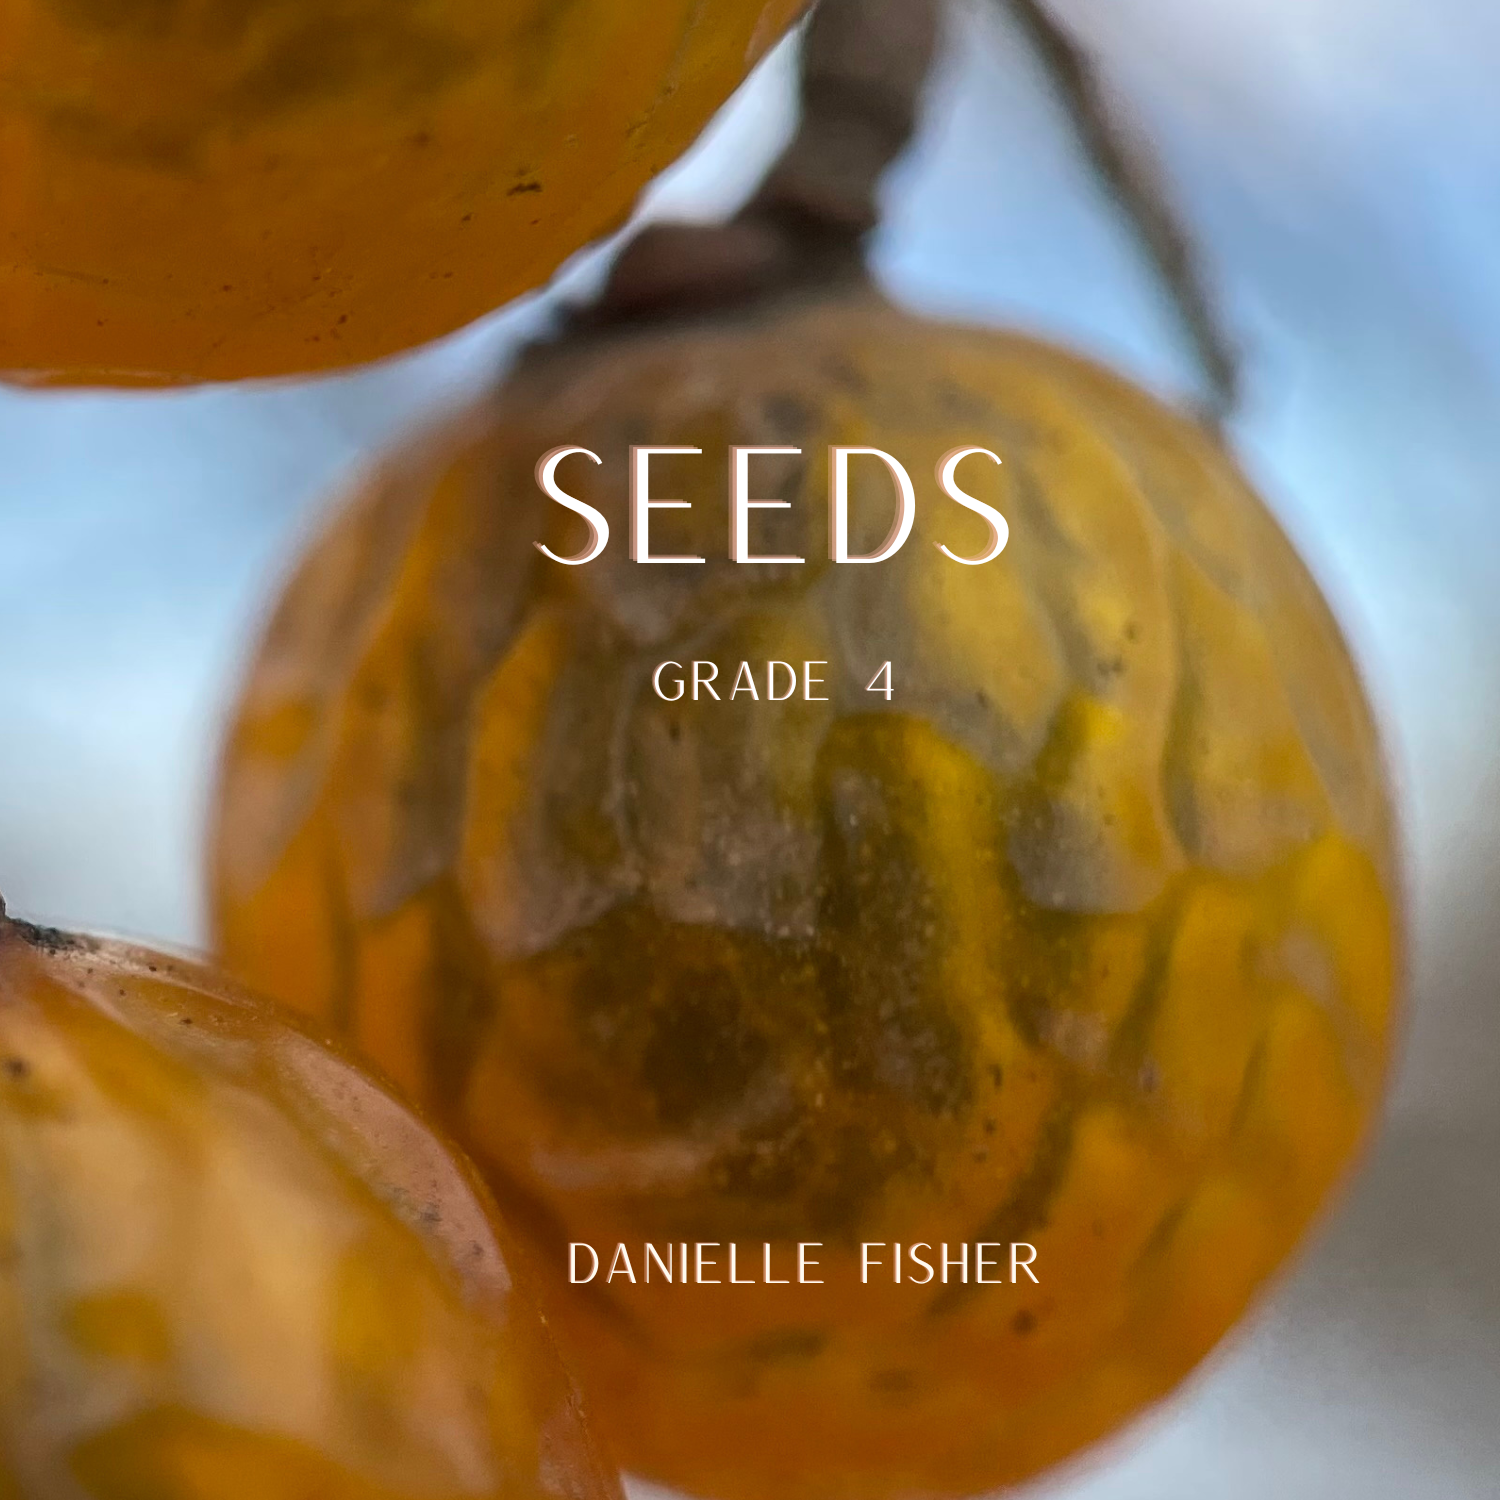 Seeds by Danielle Fisher